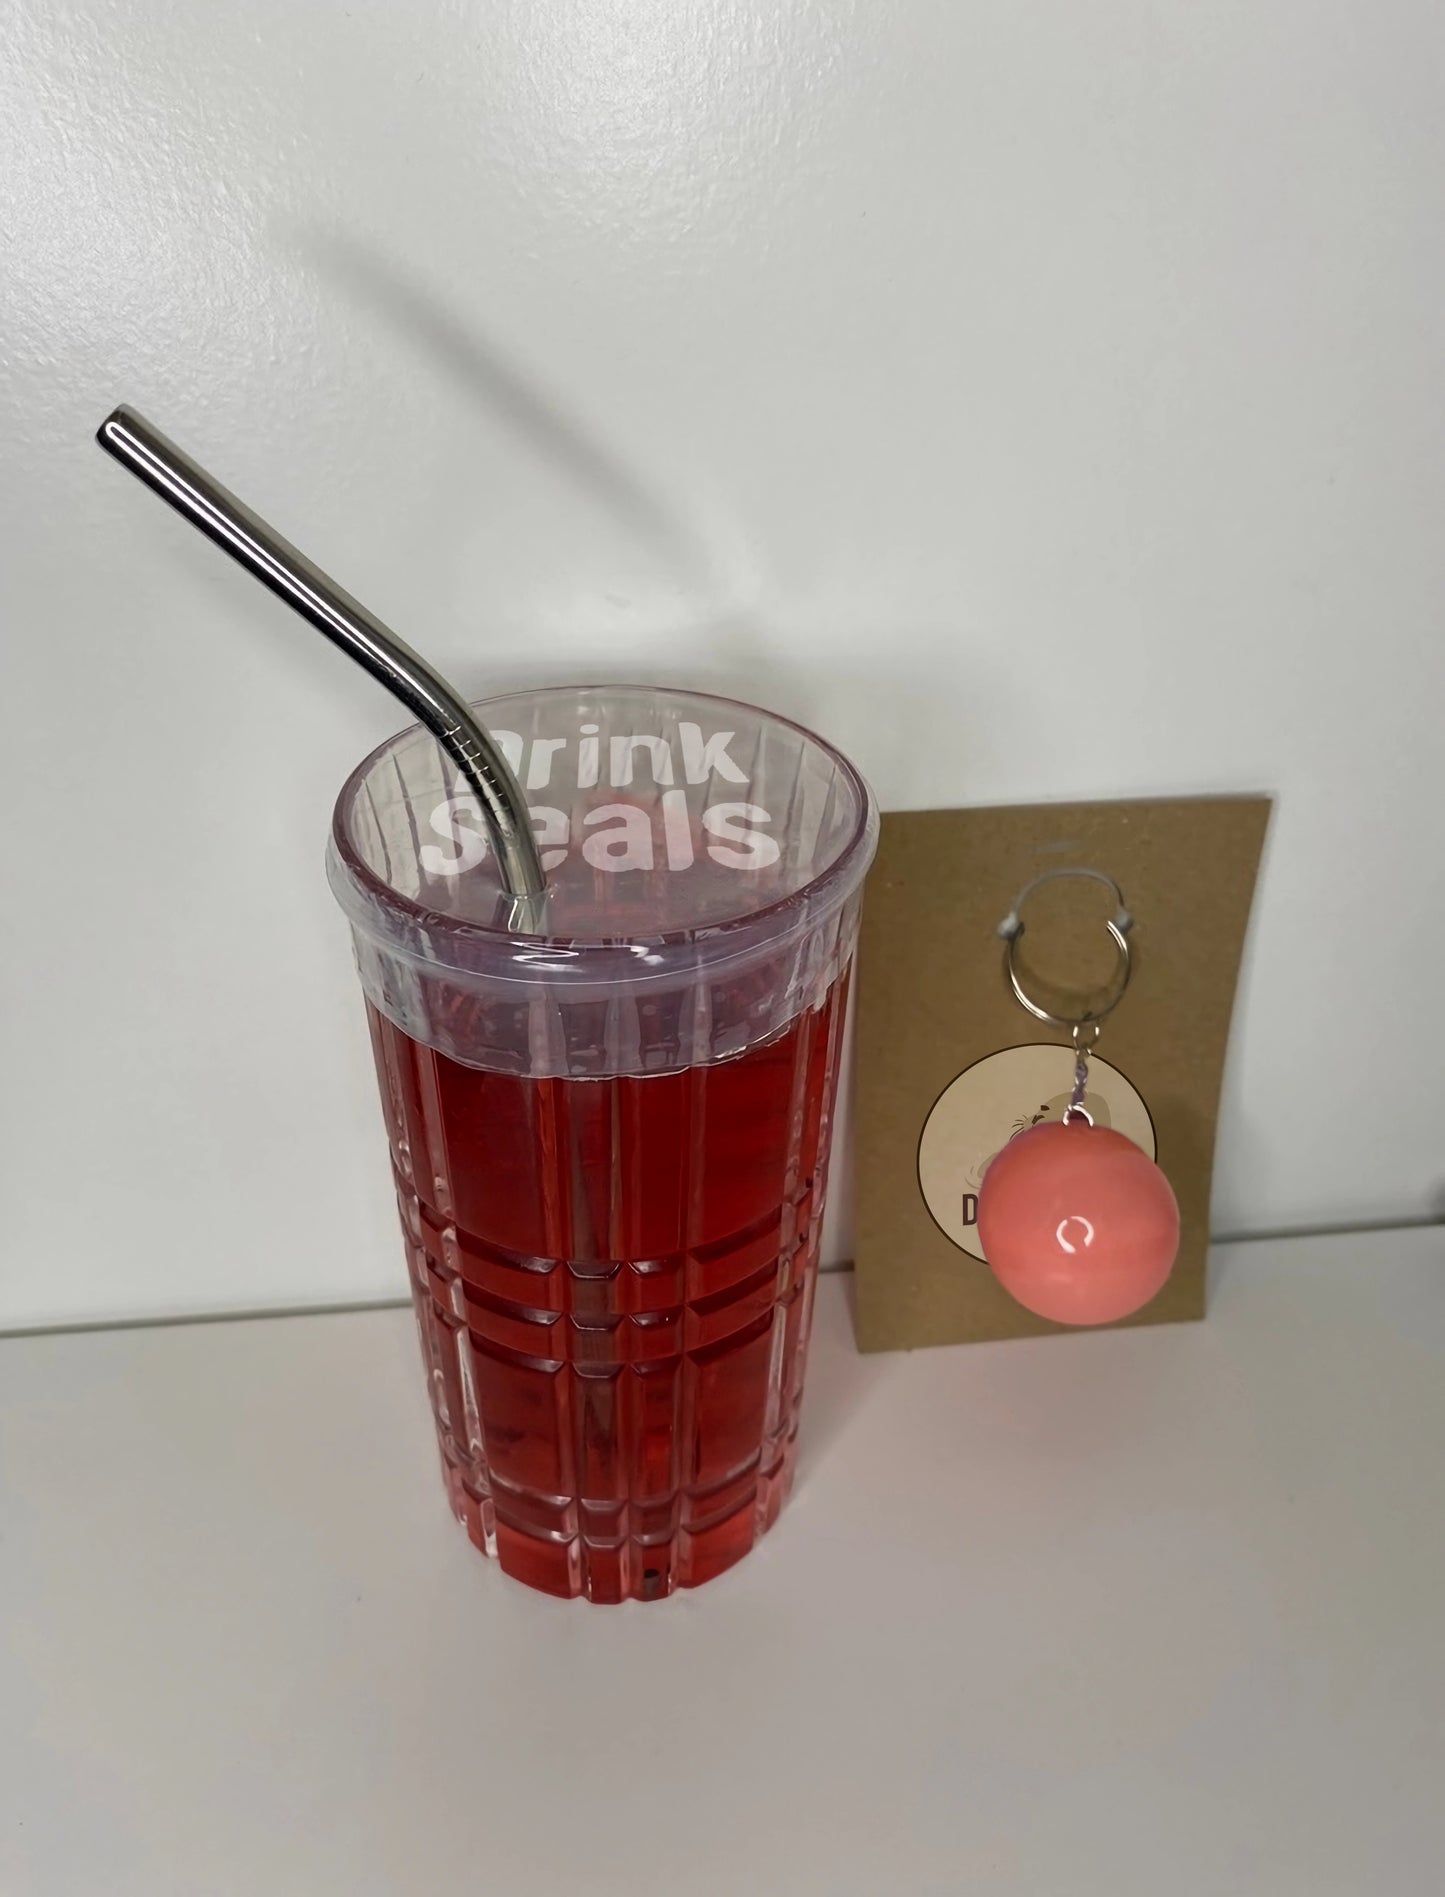 DrinkSeals Drink Cover! Free Metal Drink Straw Included!